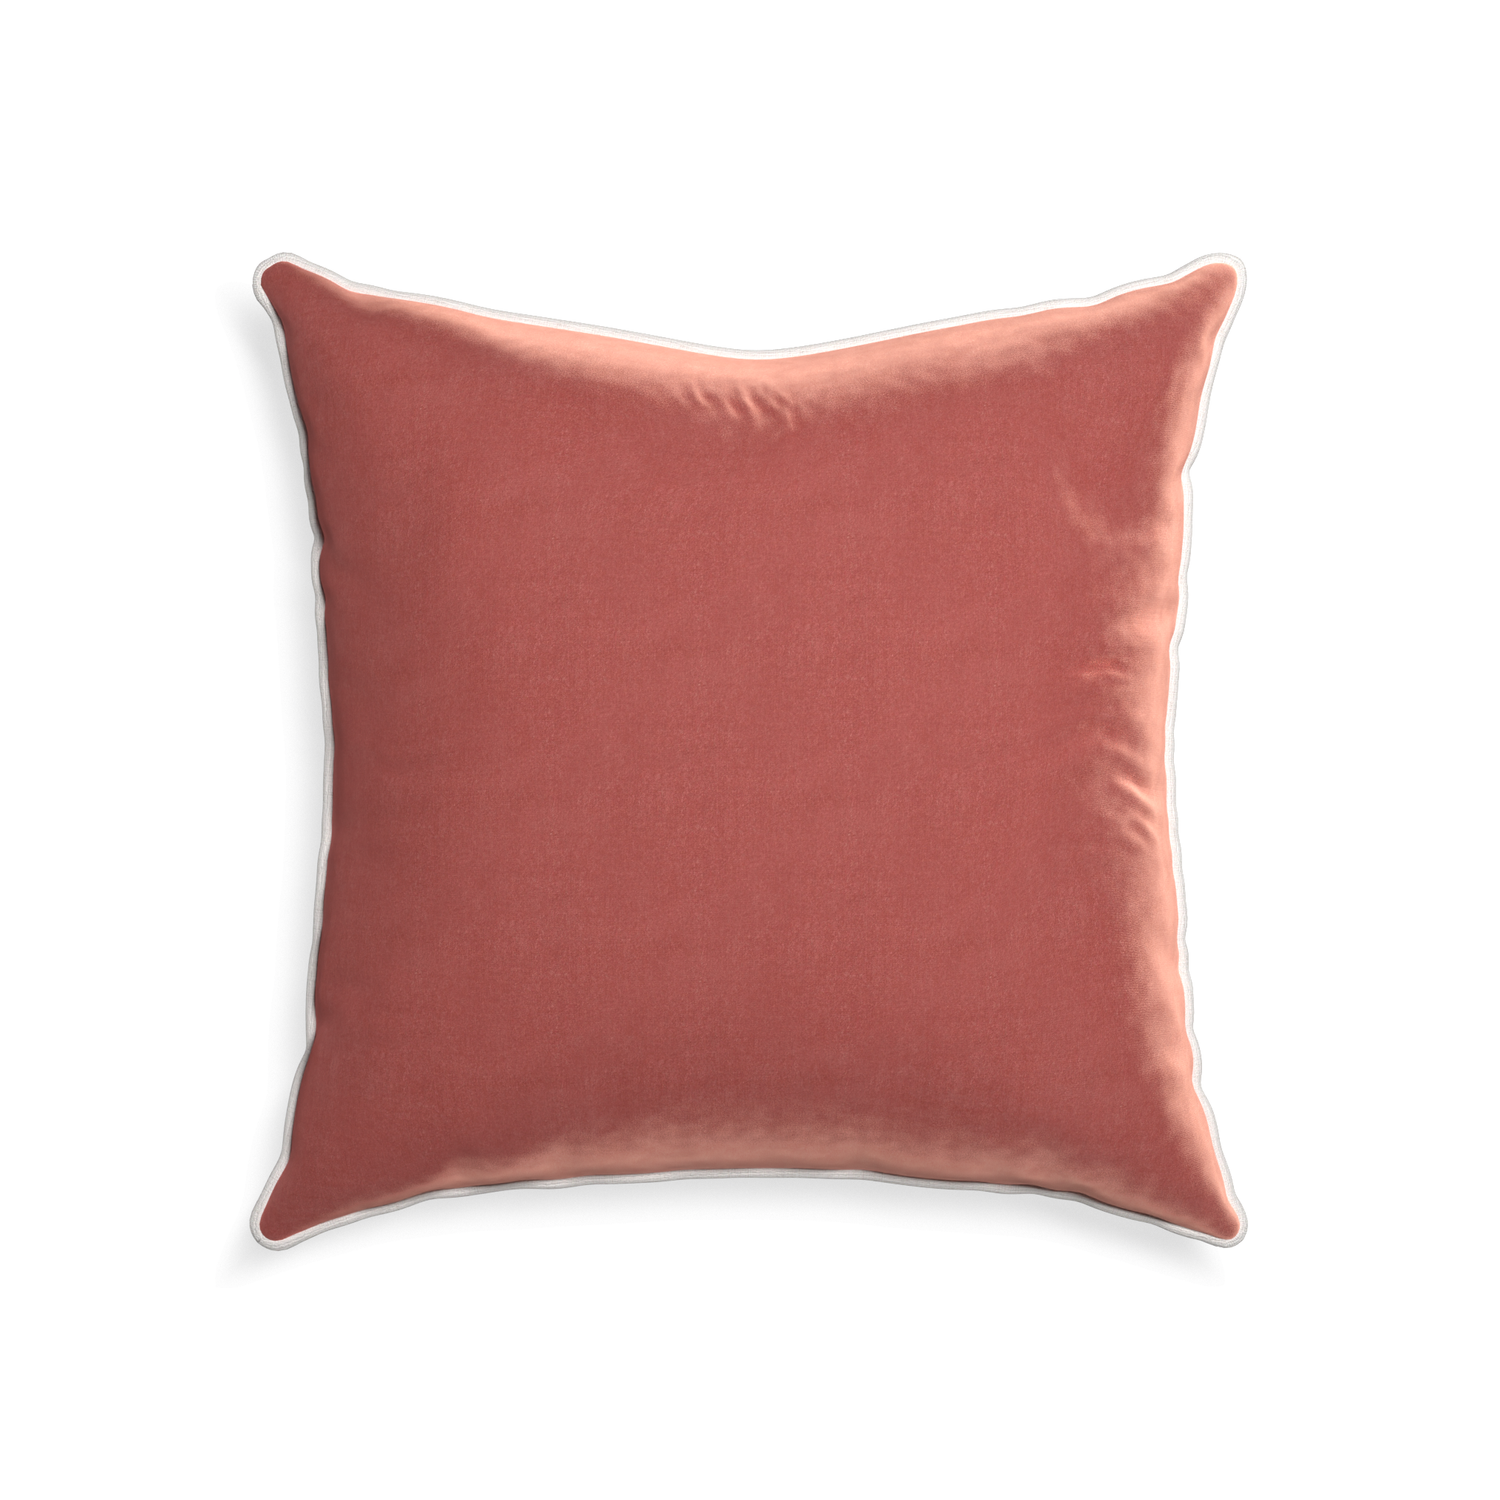 22-square cosmo velvet custom pillow with snow piping on white background